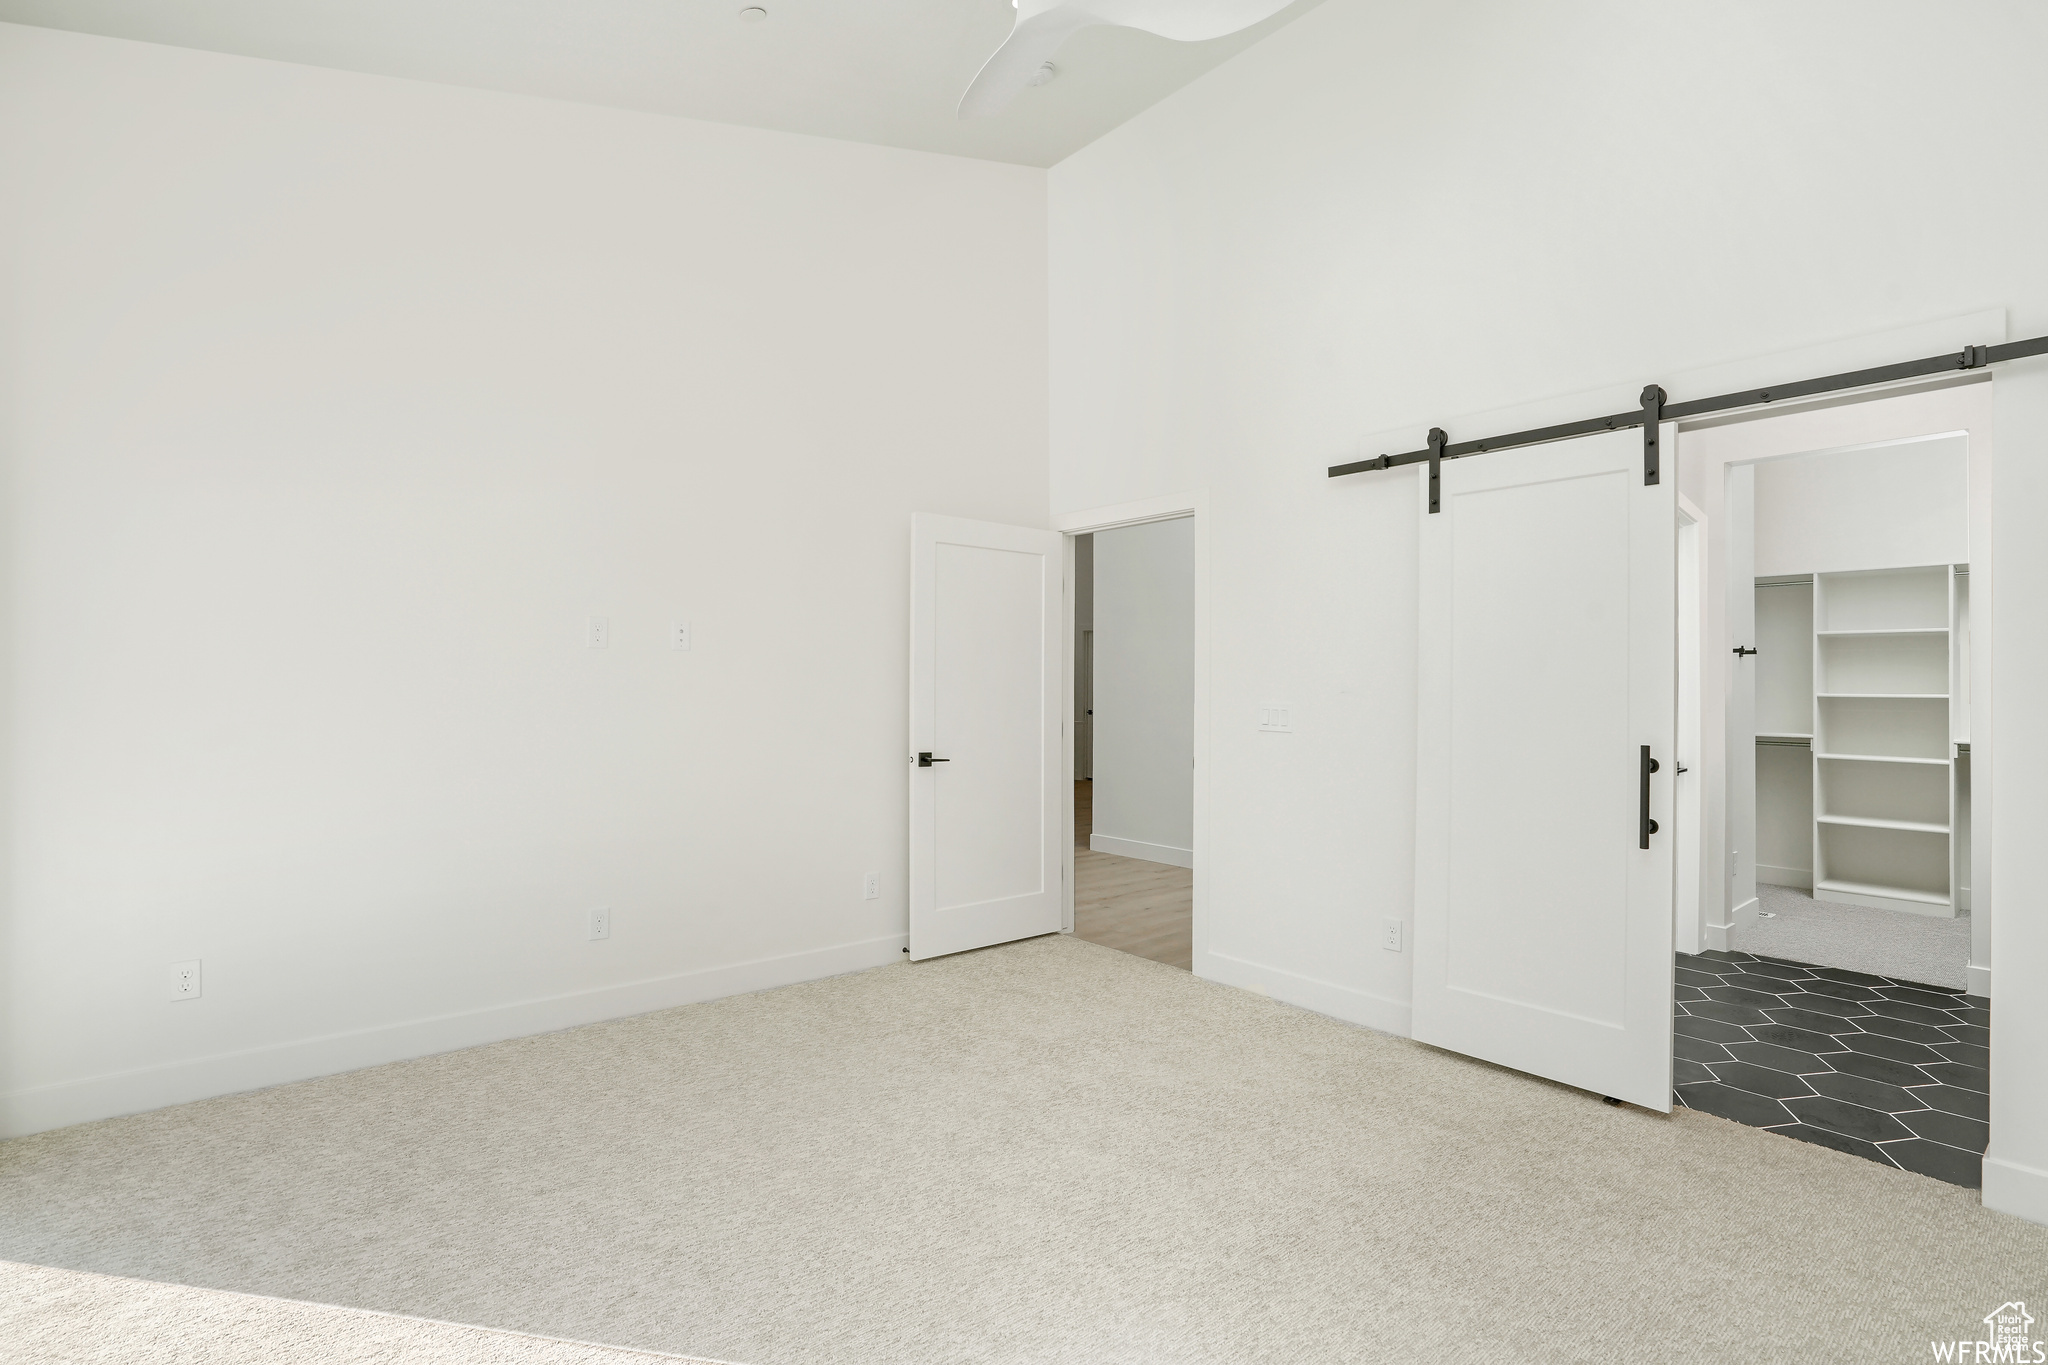 Unfurnished Master bedroom with a bathroom, a barn door, a spacious closet, light colored carpet, and ceiling fan